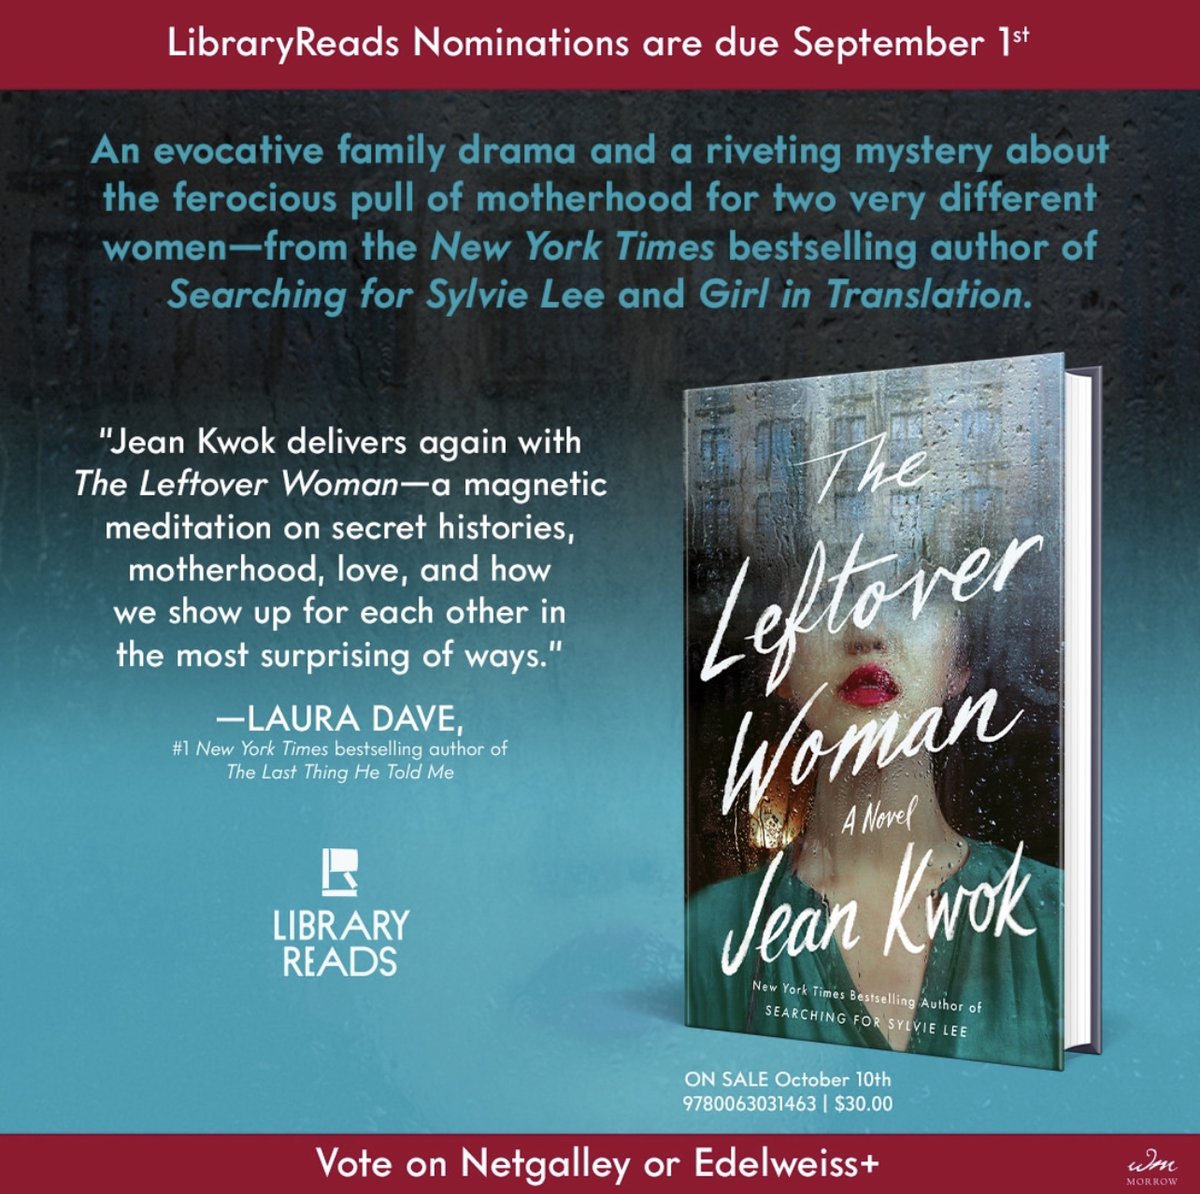 Librarians, in this time when our ability to choose what we read is under siege, please use your voice to vote for your #LibraryReads nominations! Votes for the October list are due by tomorrow, Sept. 1. We appreciate and support you. 🙏❤️ #EWGC